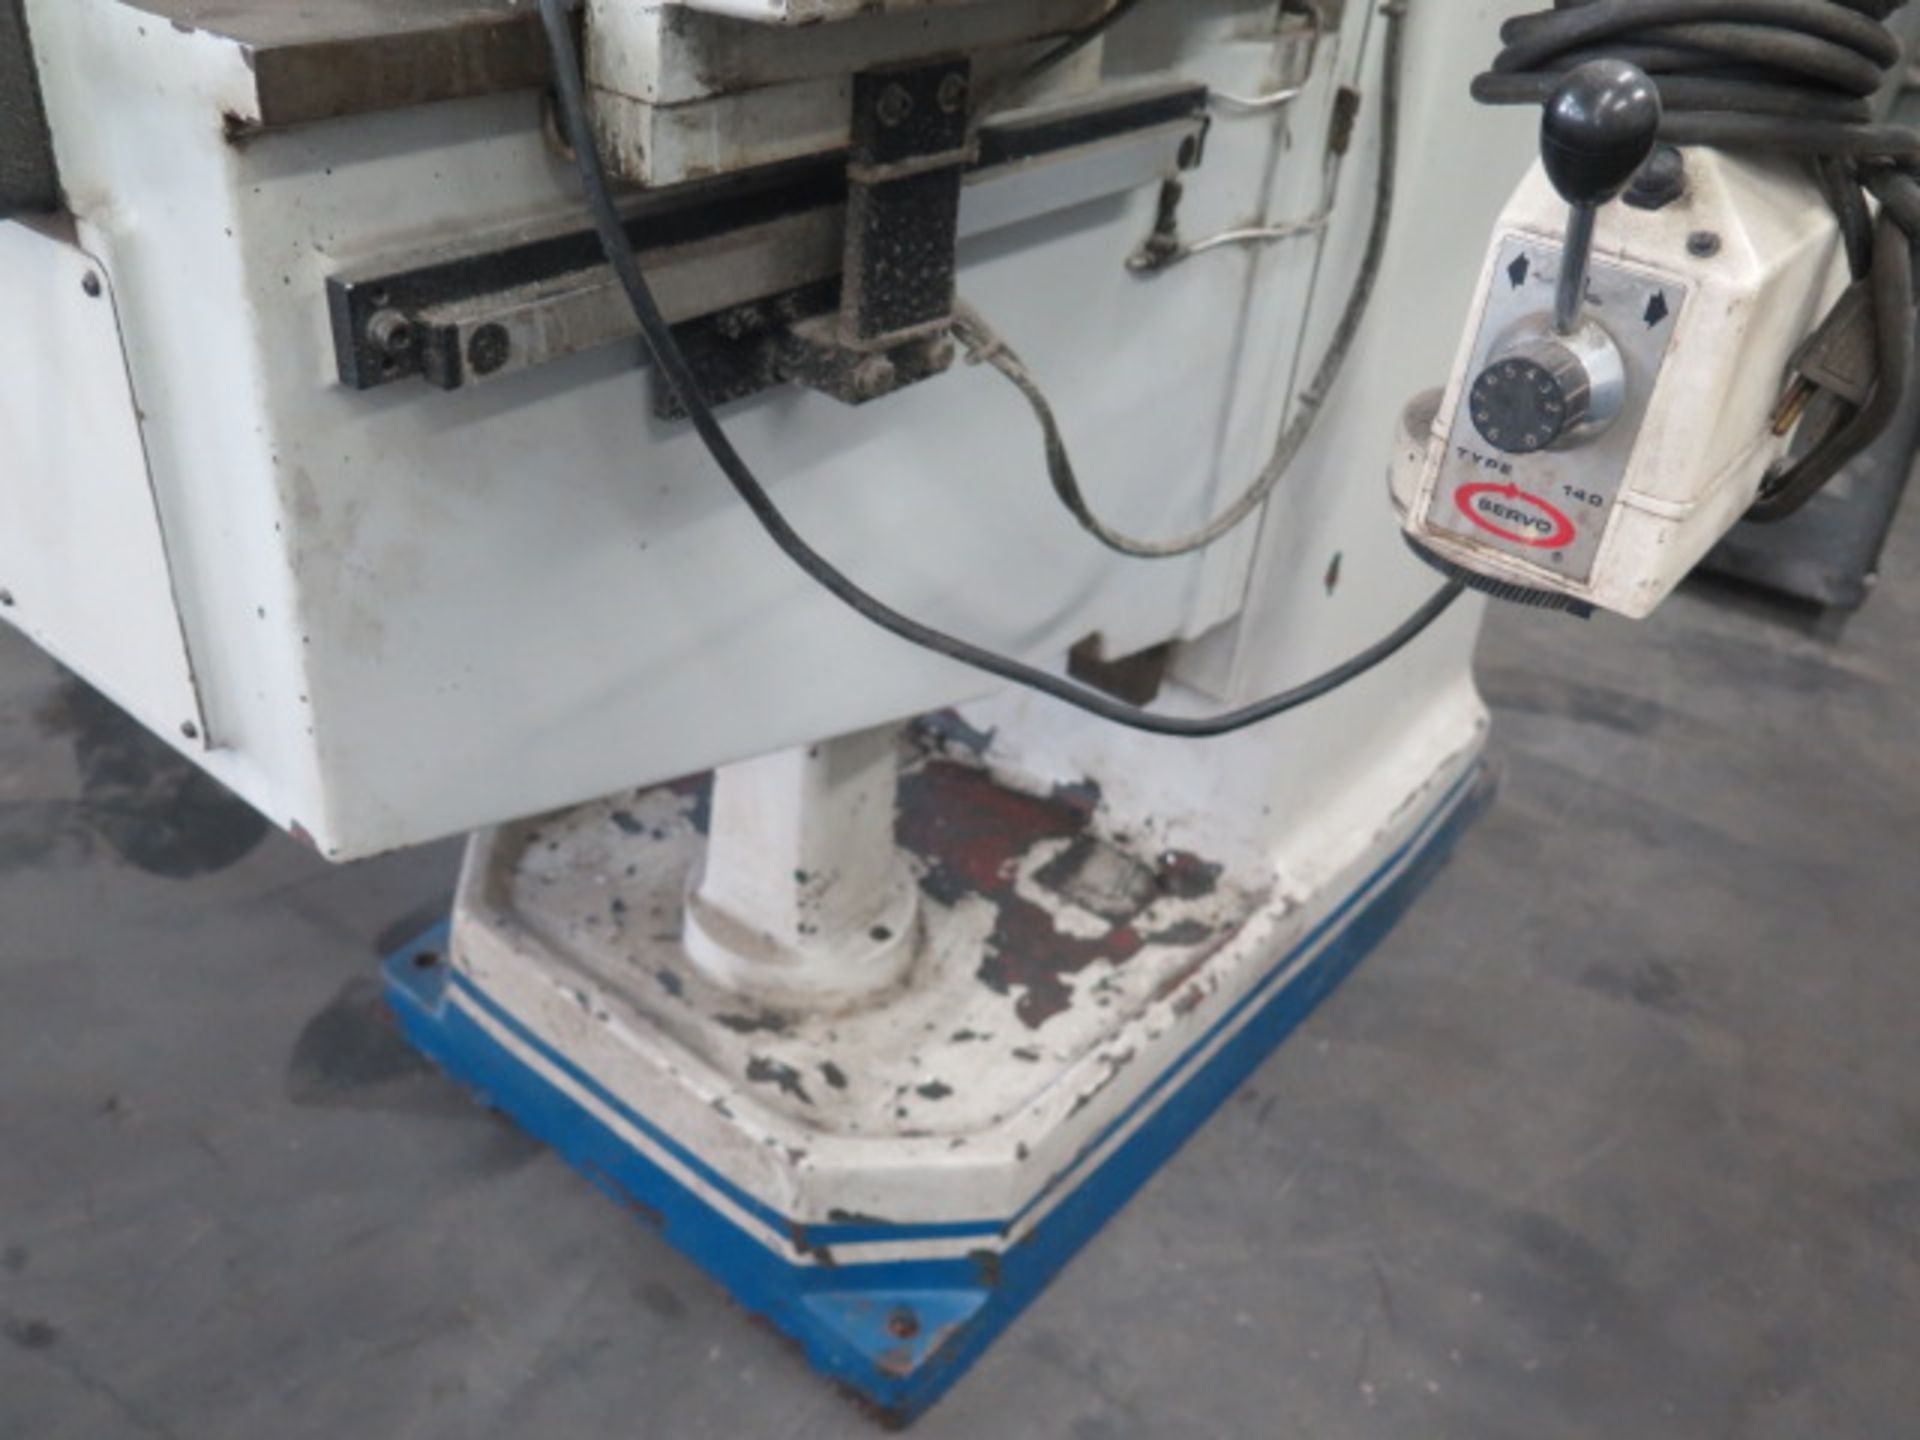 Acra AM-3 Vertical Mill s/n 961819 w/ Sargon 3-Axis DRO, 3Hp Motor, 60-4200 Dial RPM, Sold AS IS - Image 11 of 13